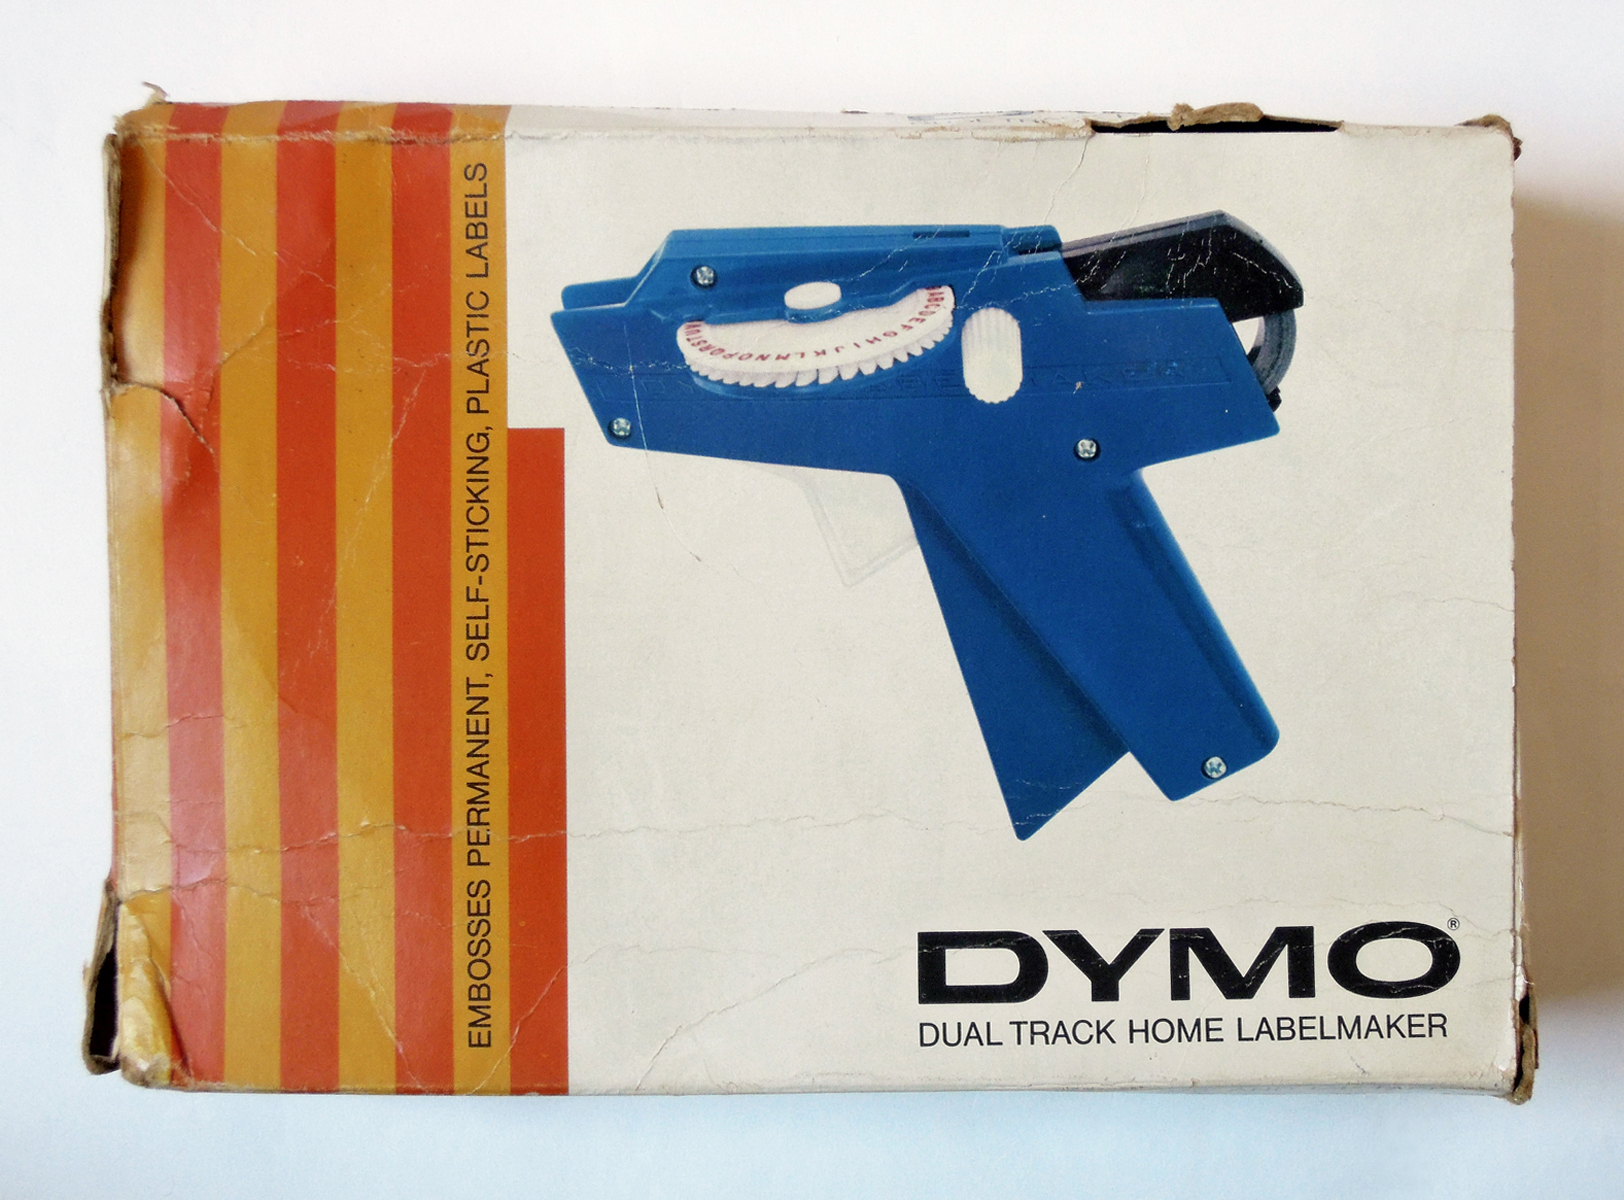 A vintage Dymo “dual track home labelmaker” box in white, orange and blue.